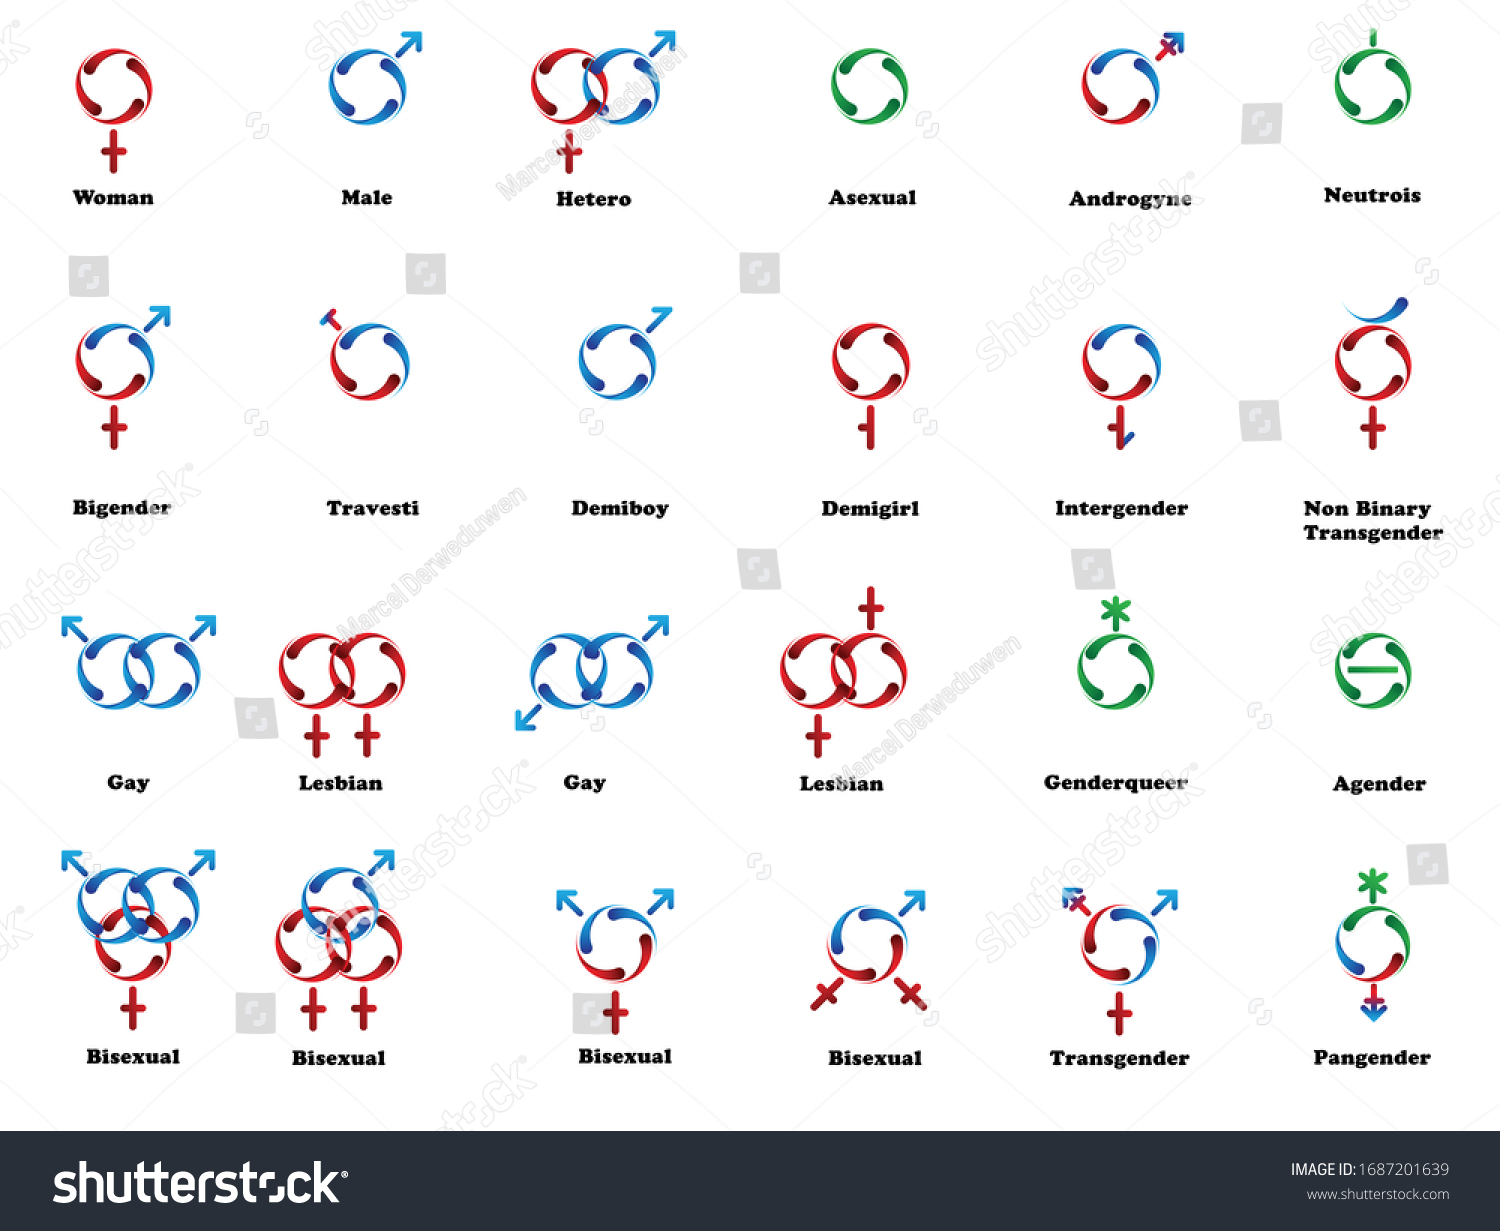 Gender Symbols Set Sexual Orientation Icons Stock Vector Royalty Free 1687201639 Shutterstock 